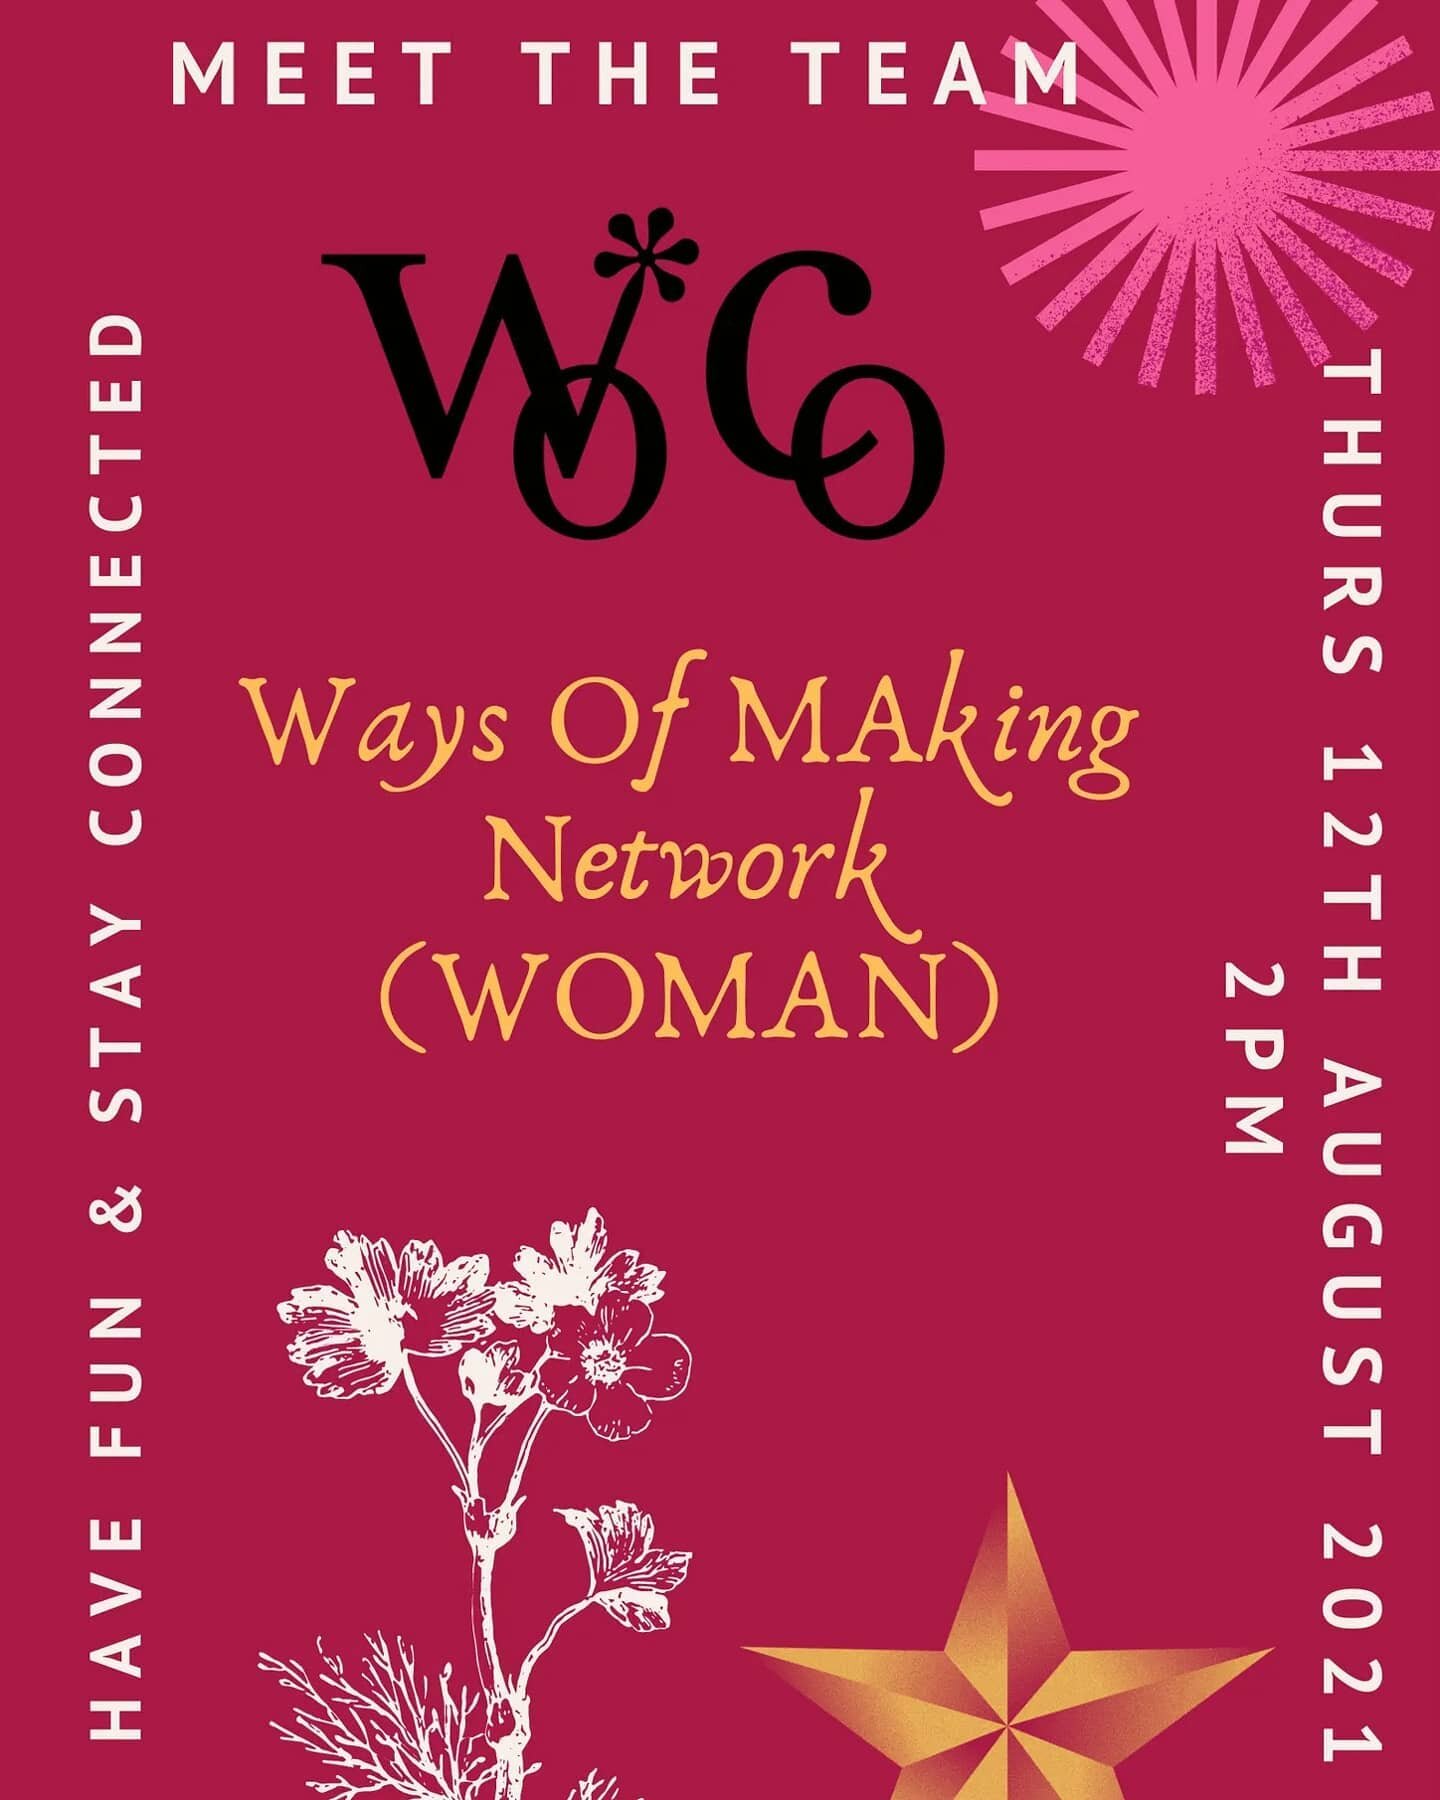 A way to connect, meet the team, share your ideas on our coming events and have some fun activities.
There will be some freebies!!!!!!!!!!!

Email: womenscollective@student.westernsydney.edu.au

Facebook page: https://m.facebook.com/wsuwoco/

Western